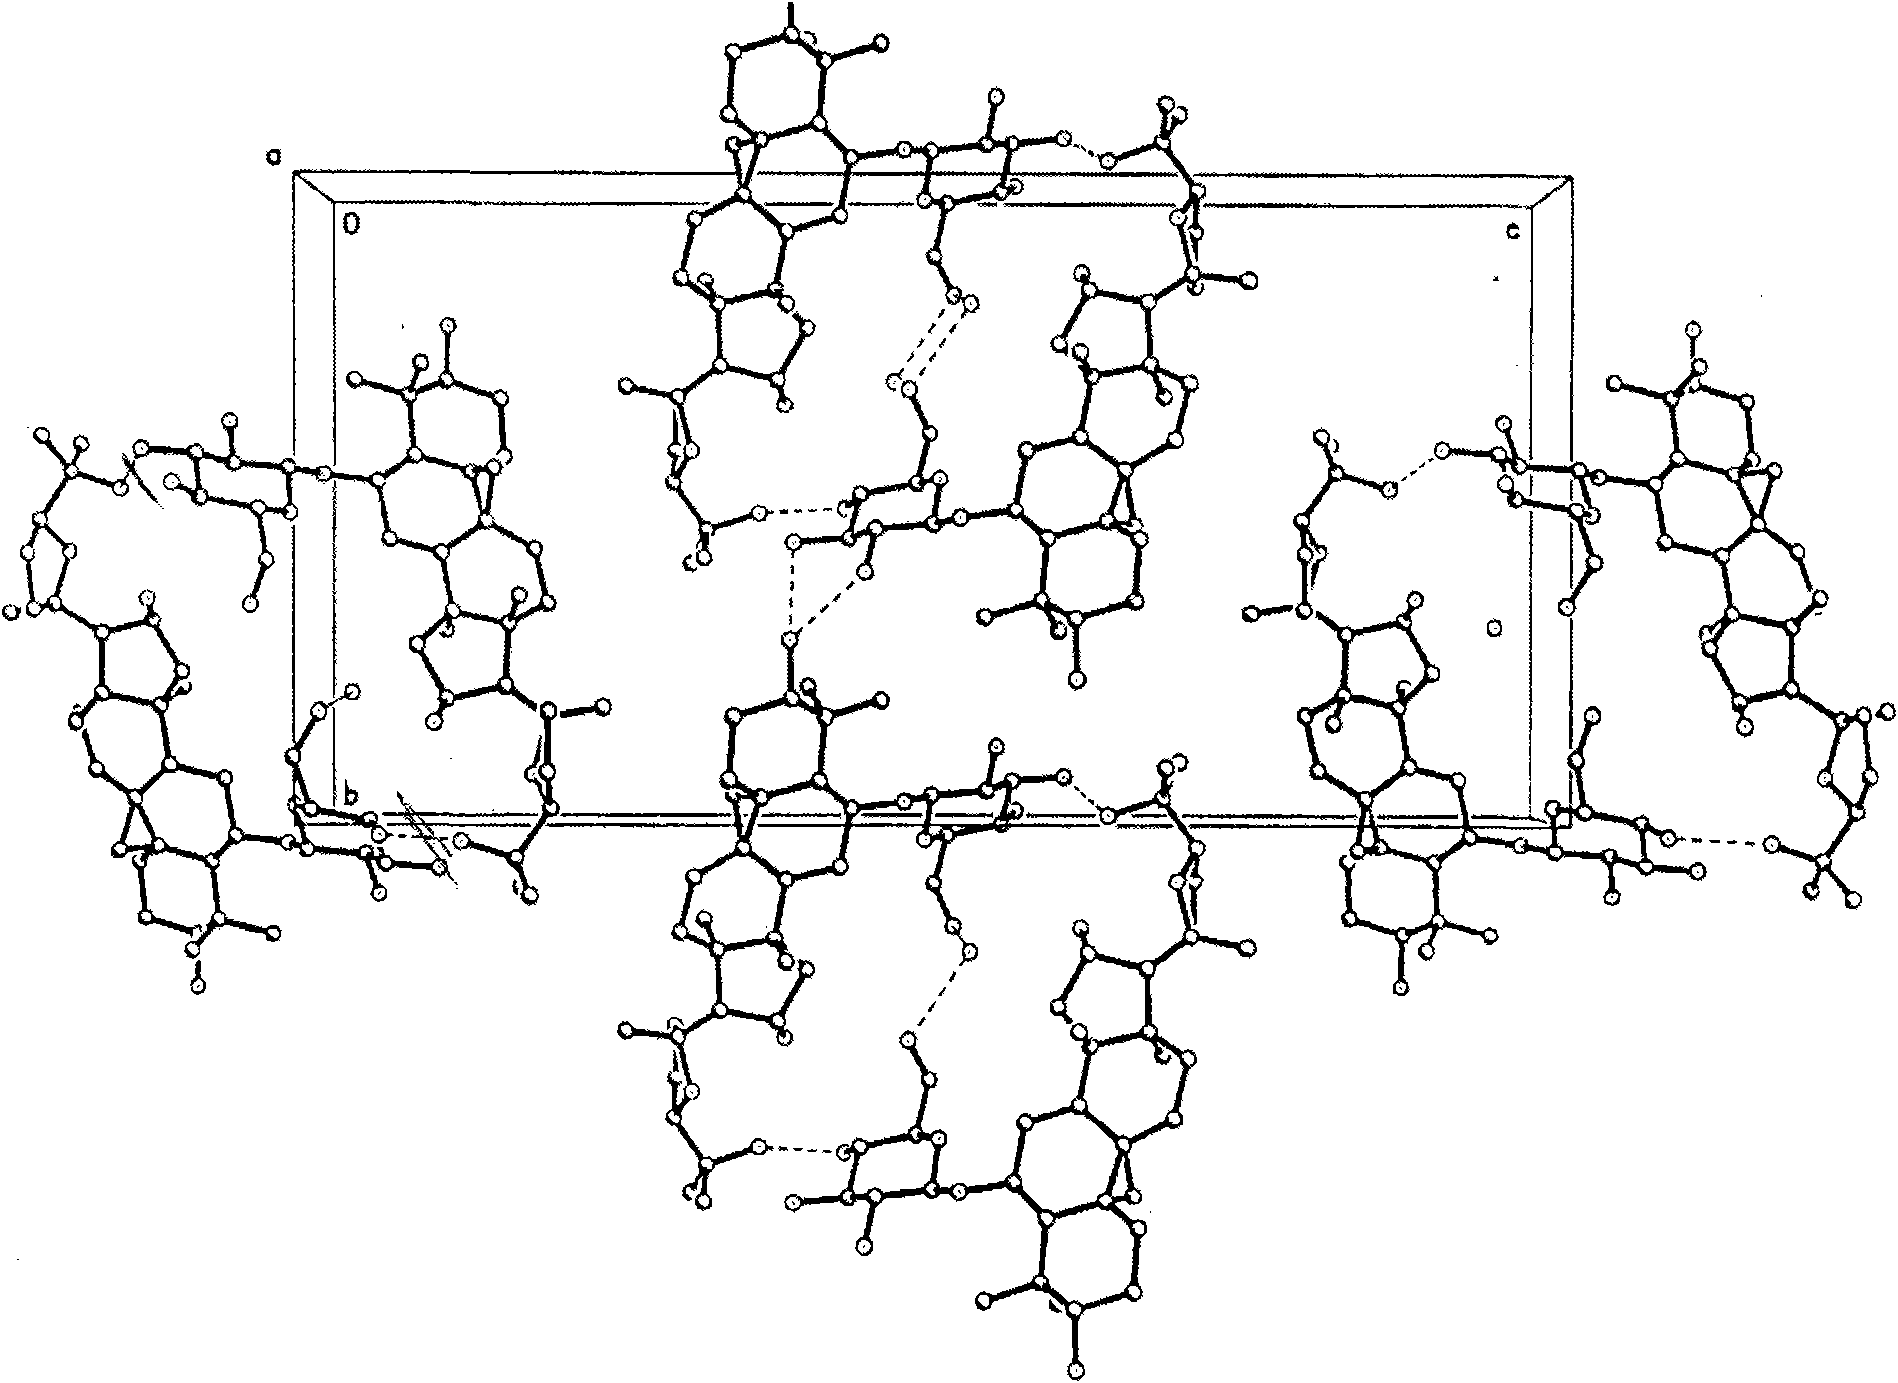 Cycloastragenol-6-O-beta-D glucoside monohydrate and crystal thereof